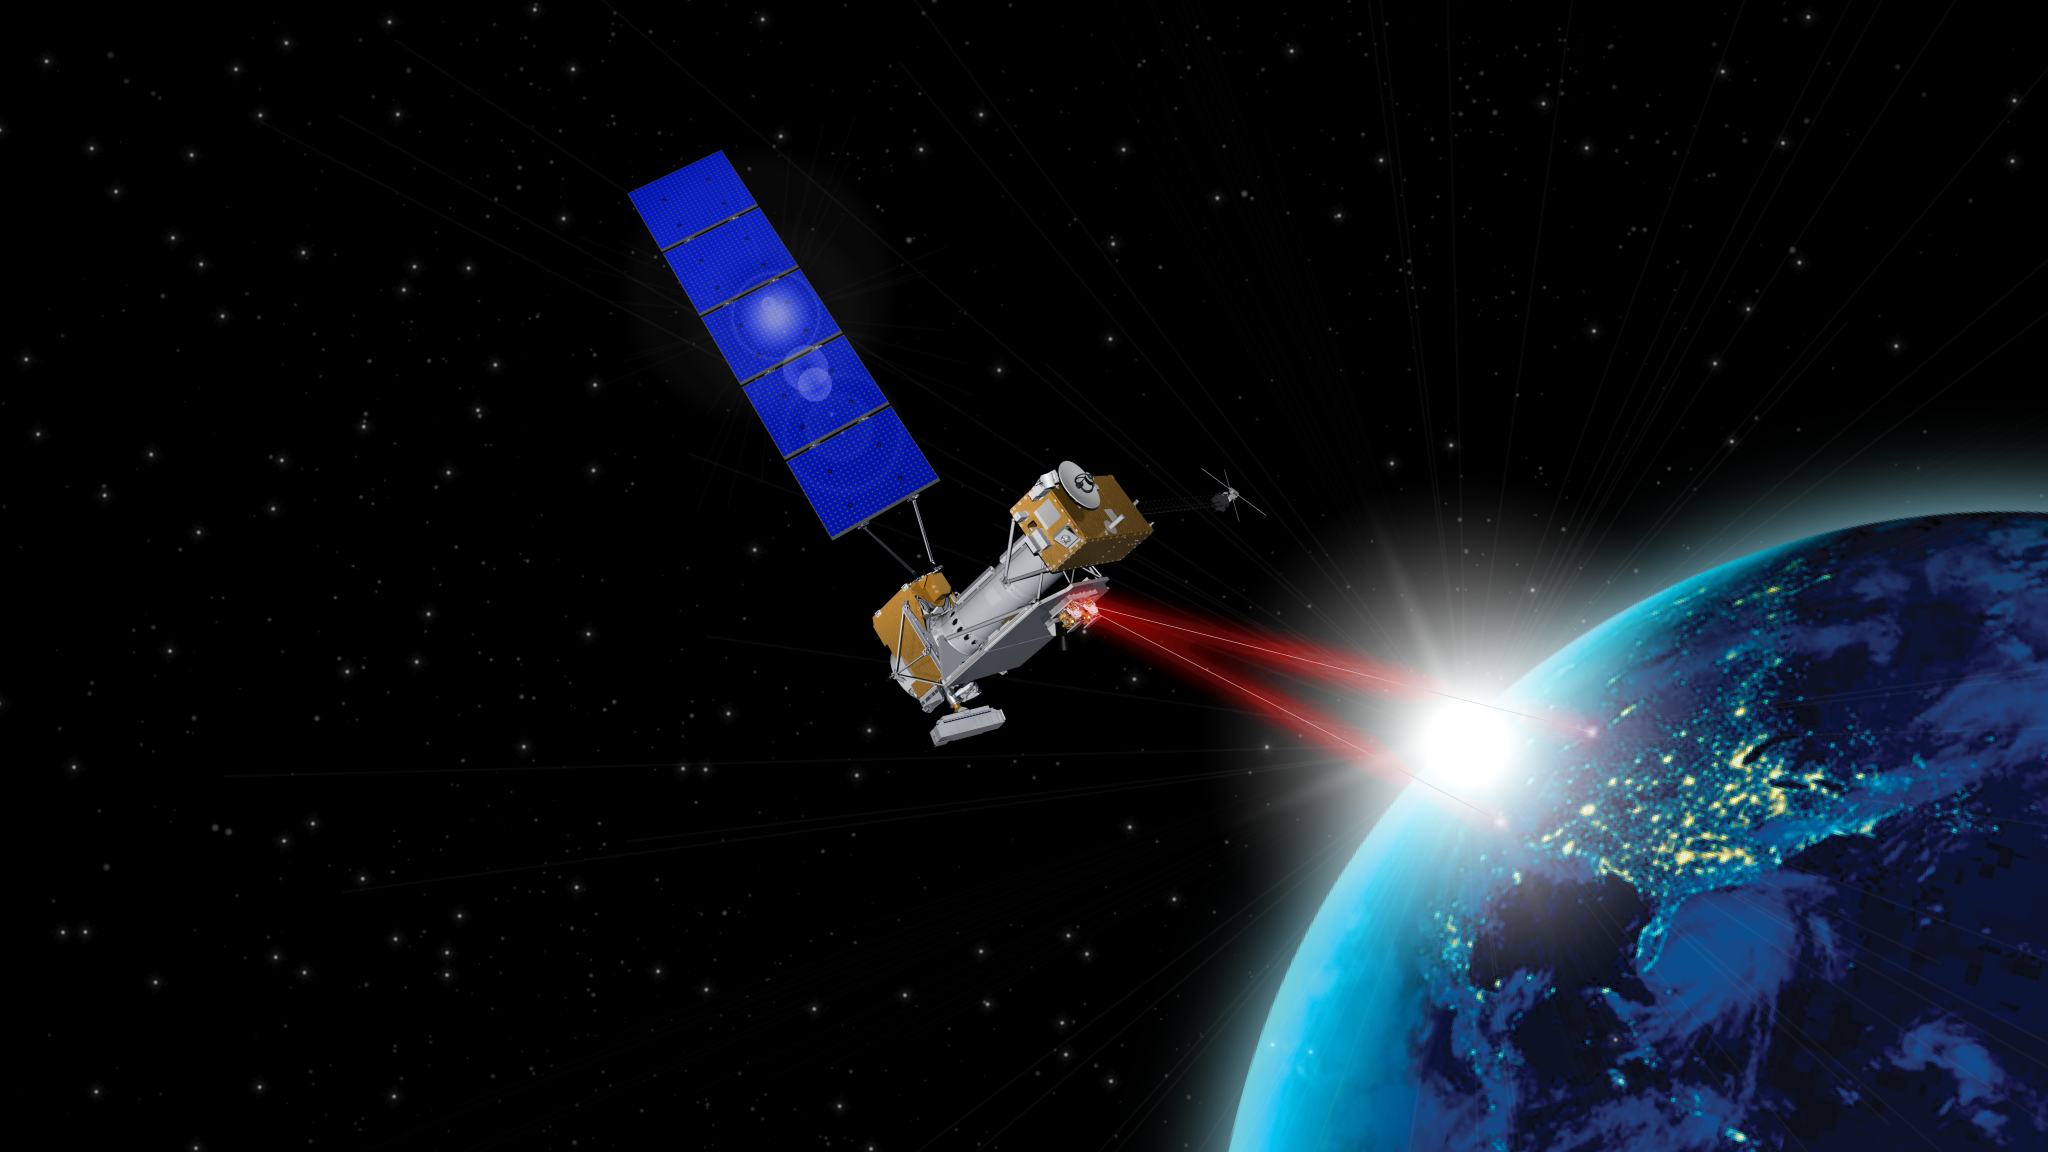 Artist rendering of NASA's Laser Communications Relay Demonstration beaming two red lasers  from a spacecraft with a 5 square panel towards Earth.